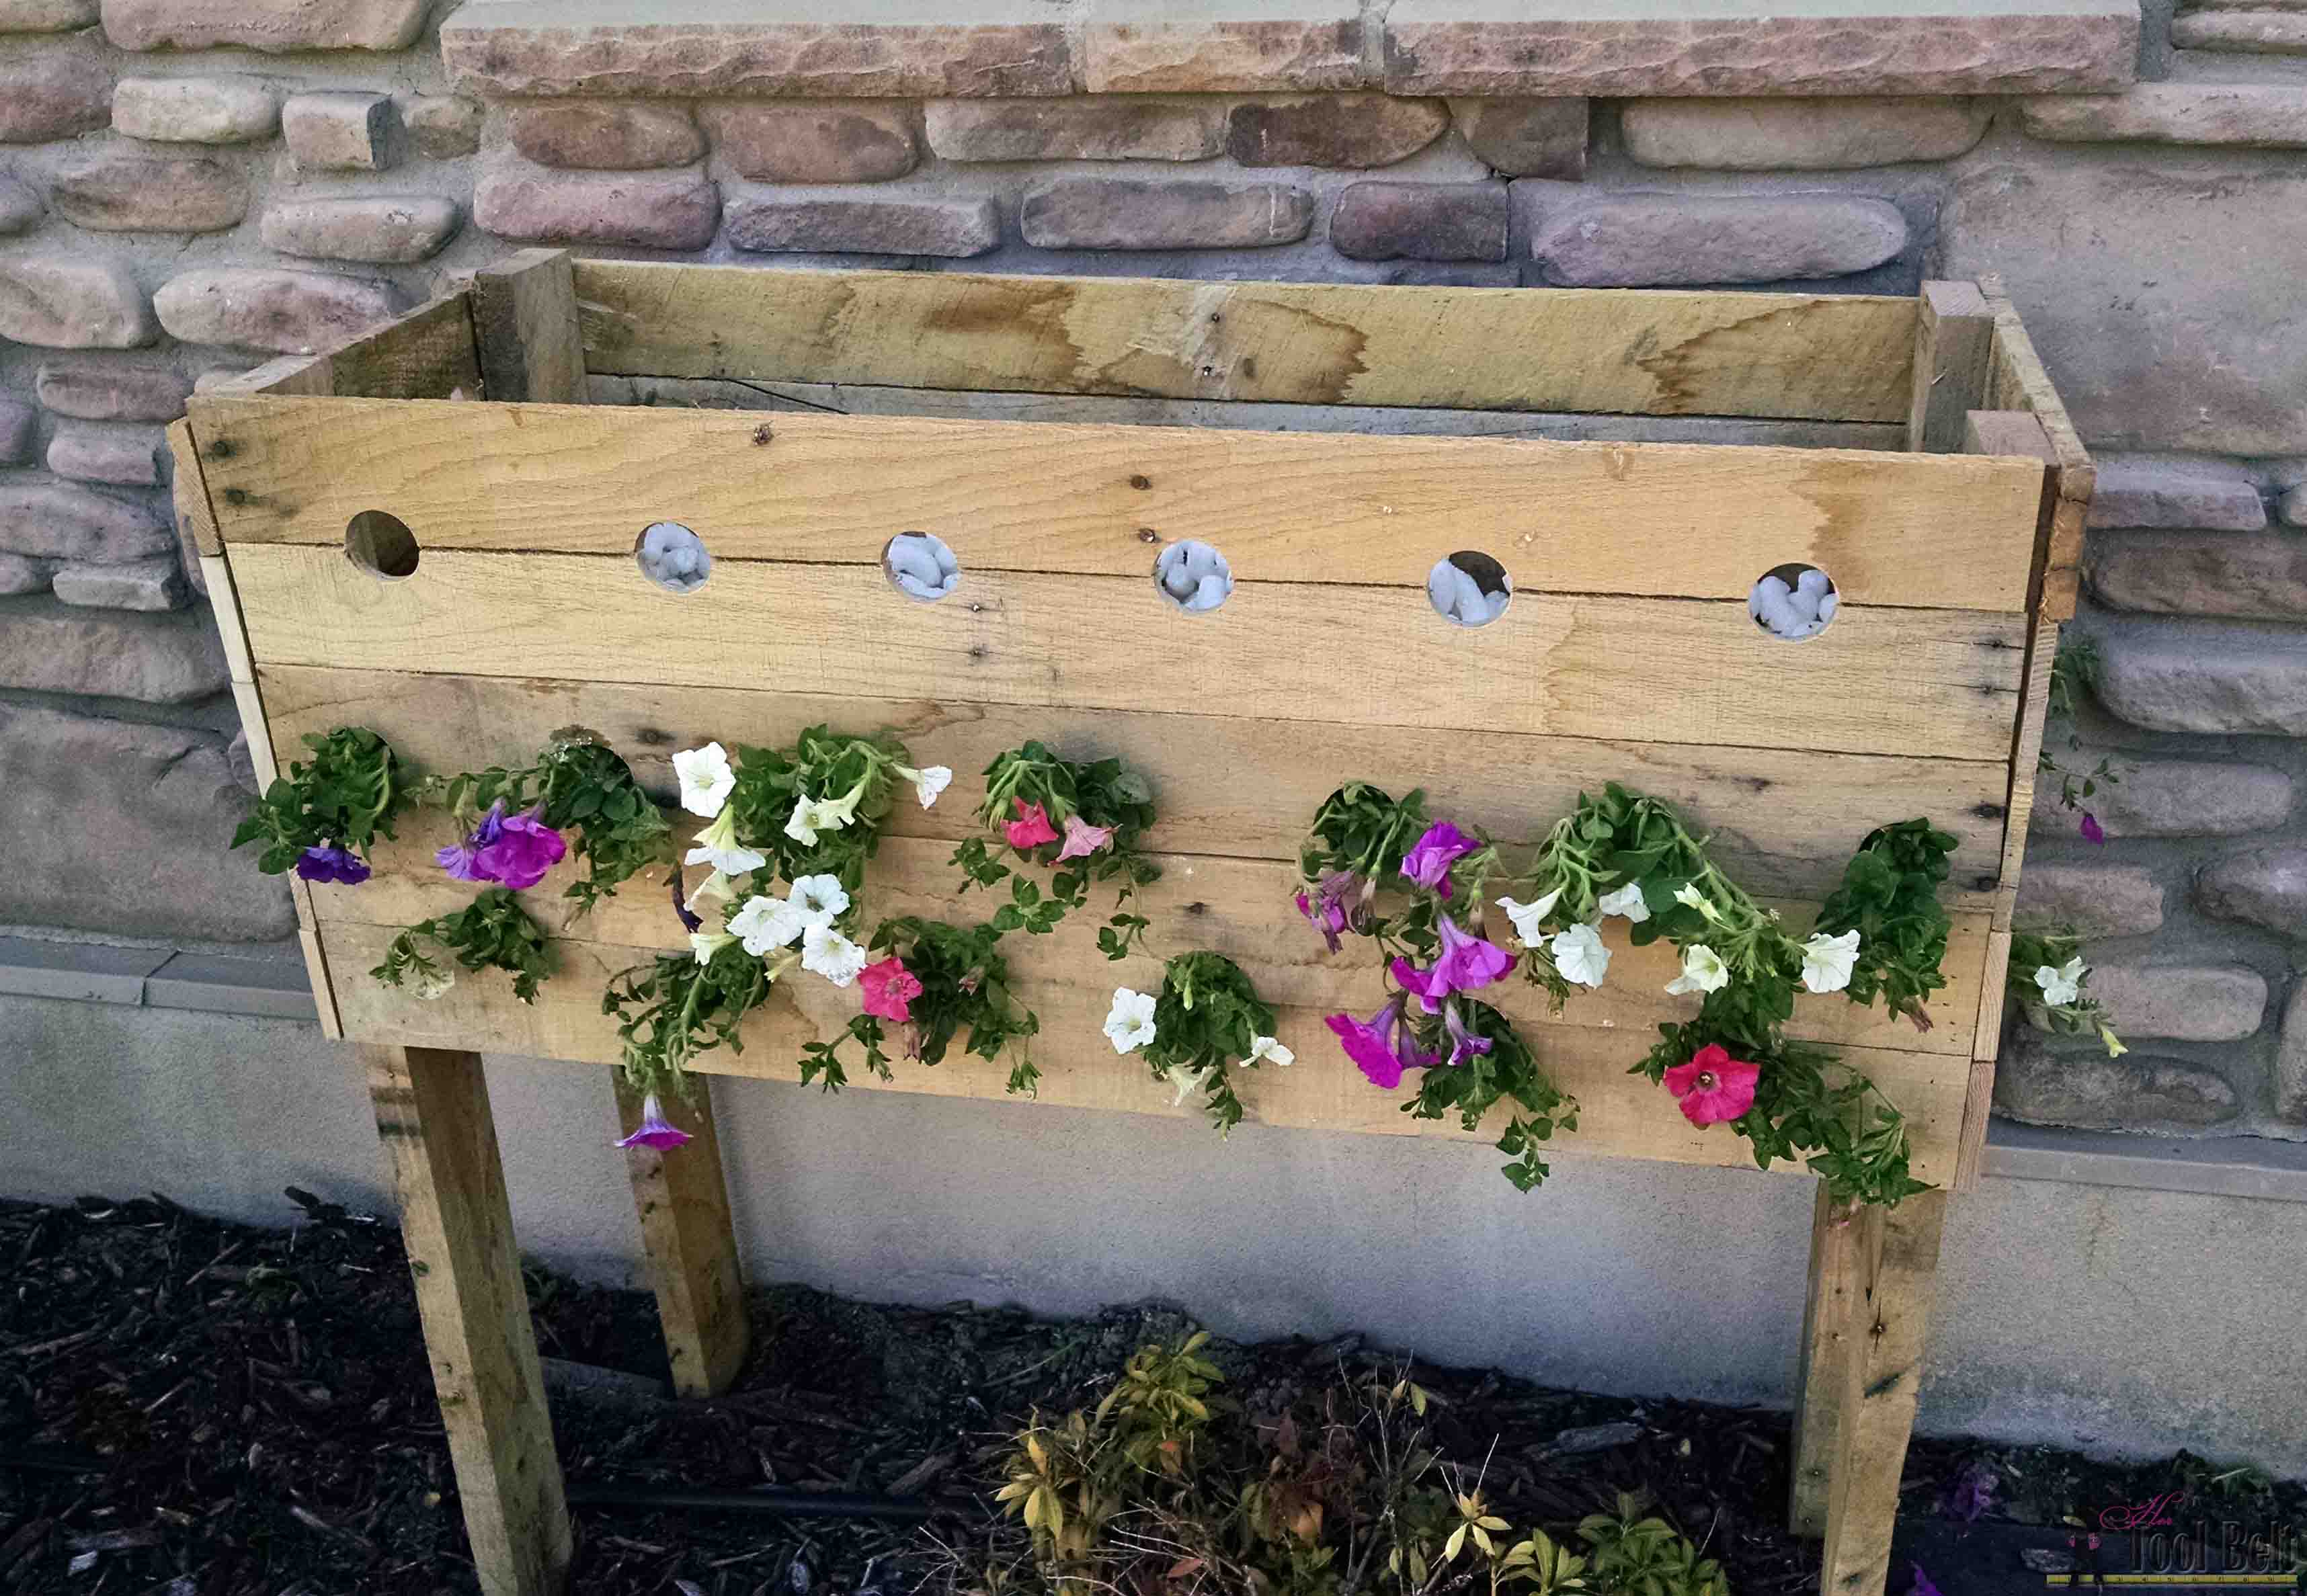 Check out these flowers - DIY pallet planter box for those amazing cascading flower baskets.